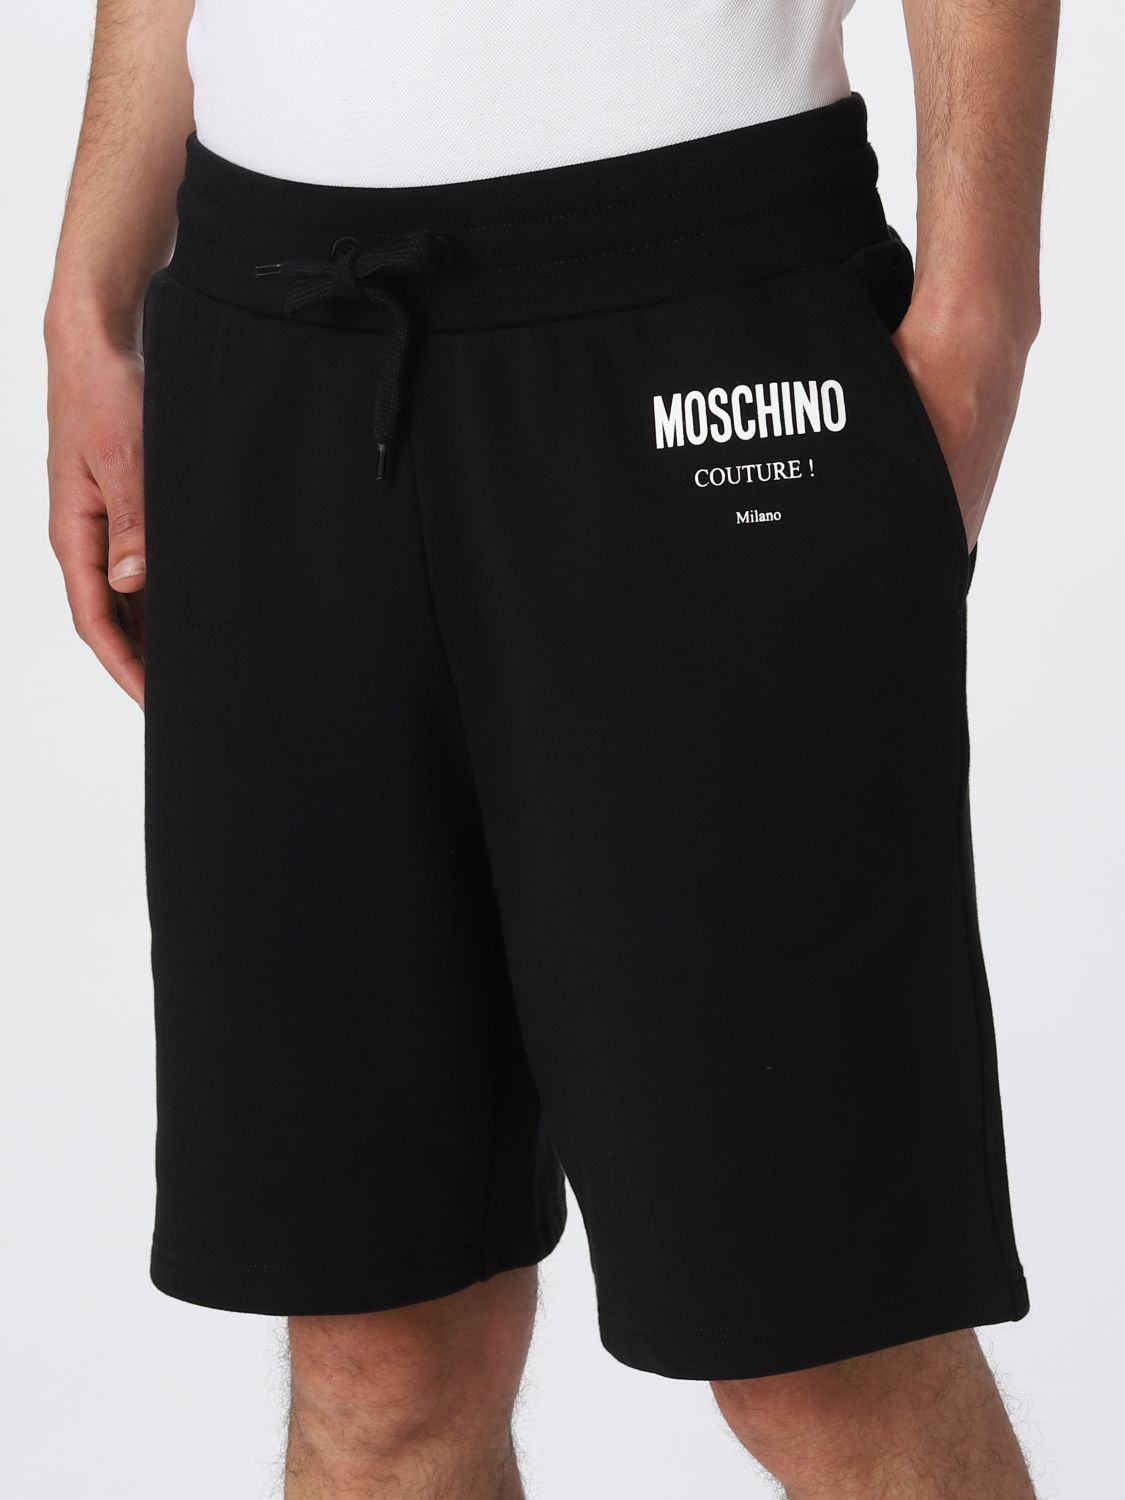 Short Moschino Couture: Moschino Couture men's trousers black 4